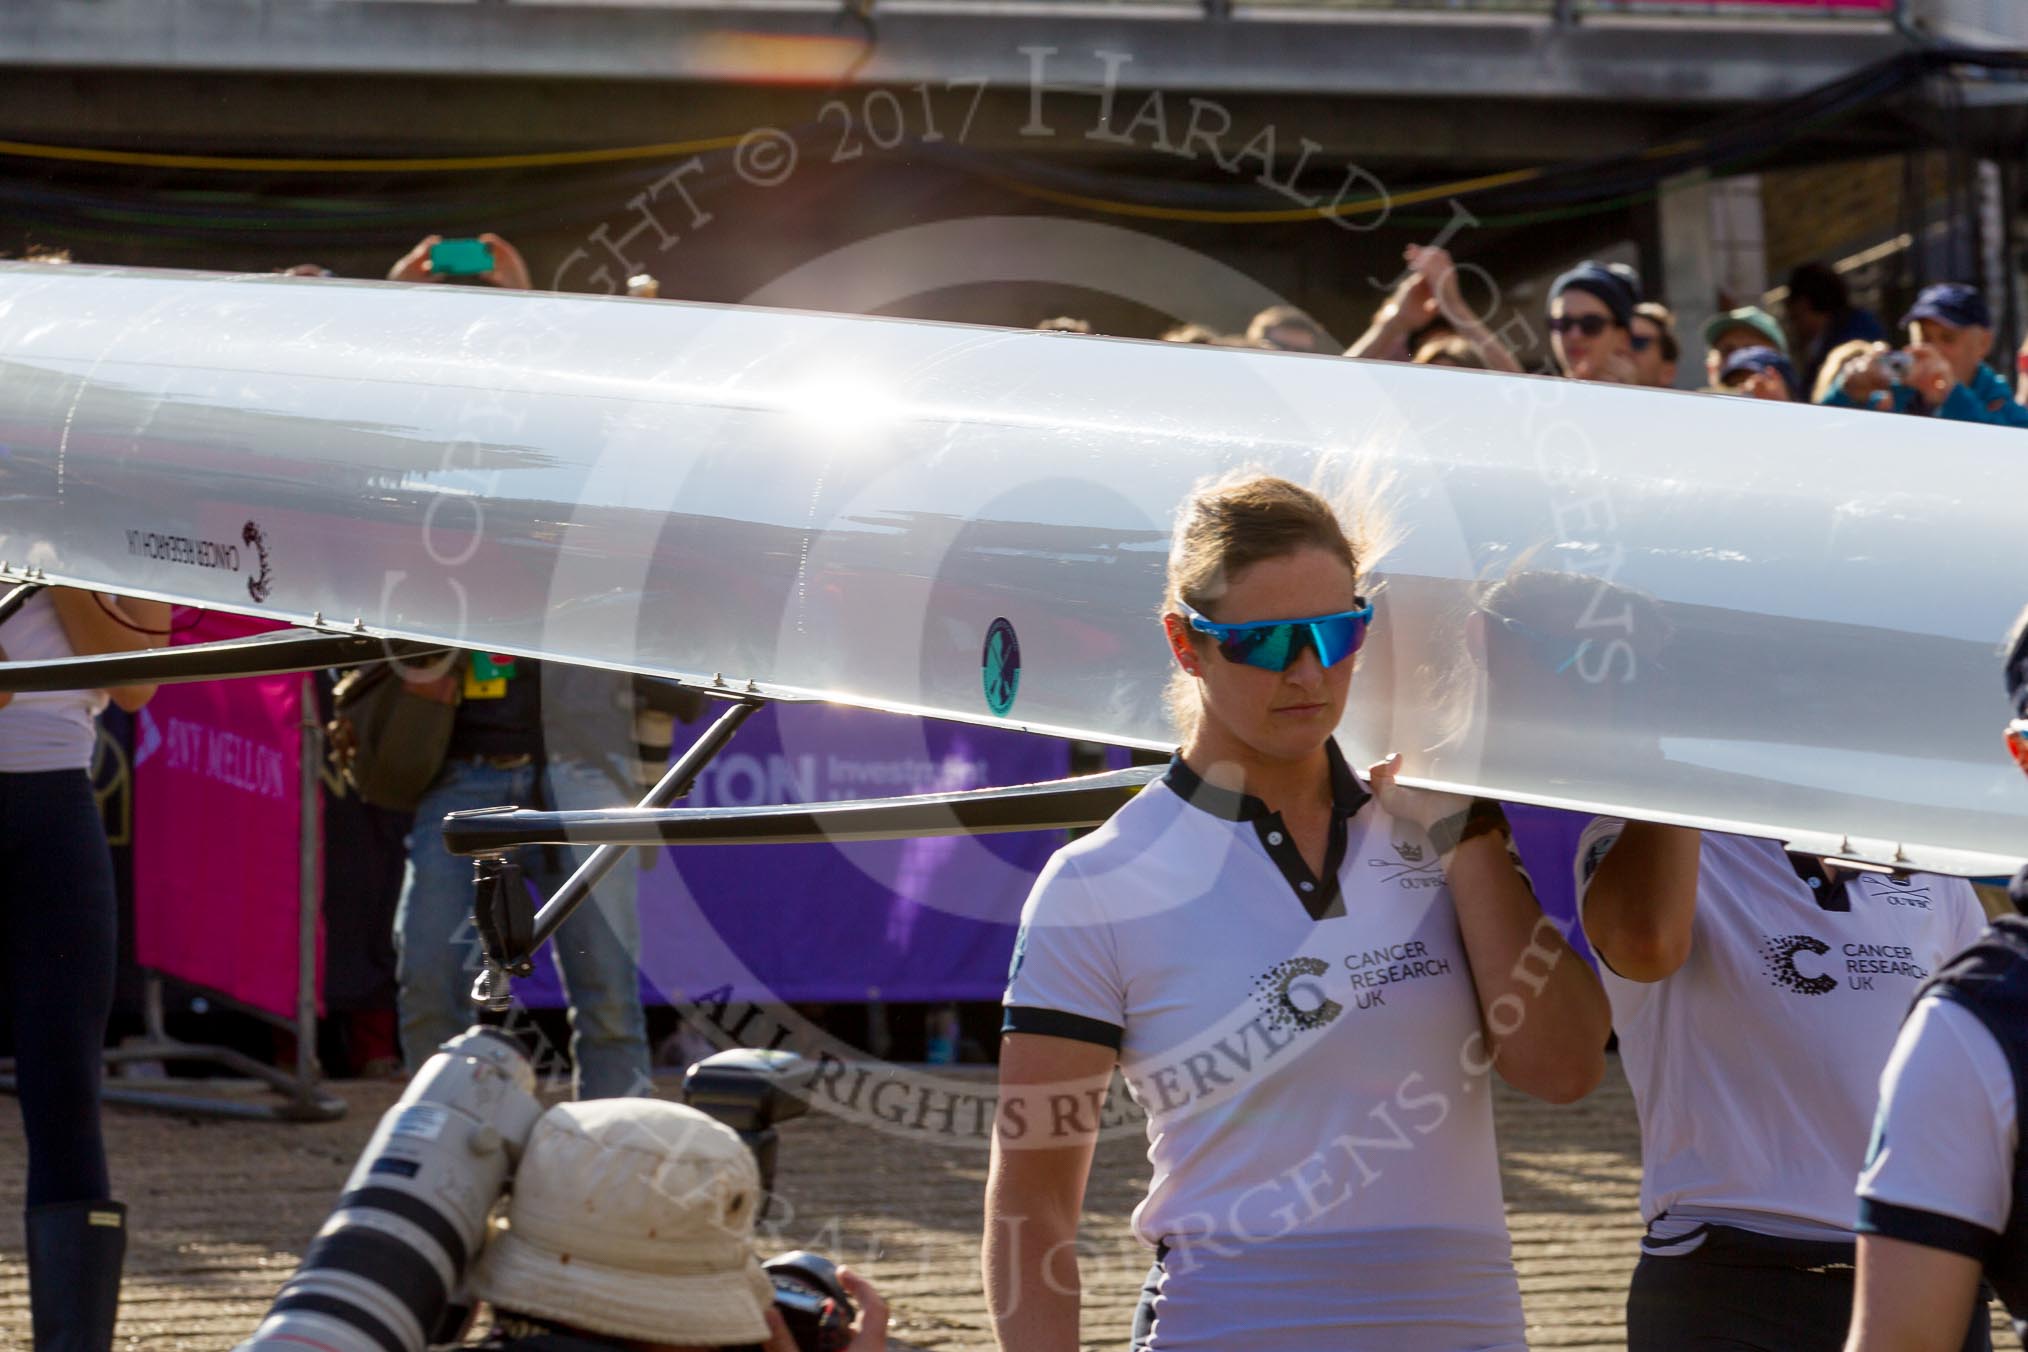 The Boat Race season 2017 -  The Cancer Research Women's Boat Race: OUWBC carrying their boat from the boathouses to the Thames, in front 6 seat Harriet Austin.
River Thames between Putney Bridge and Mortlake,
London SW15,

United Kingdom,
on 02 April 2017 at 15:50, image #78